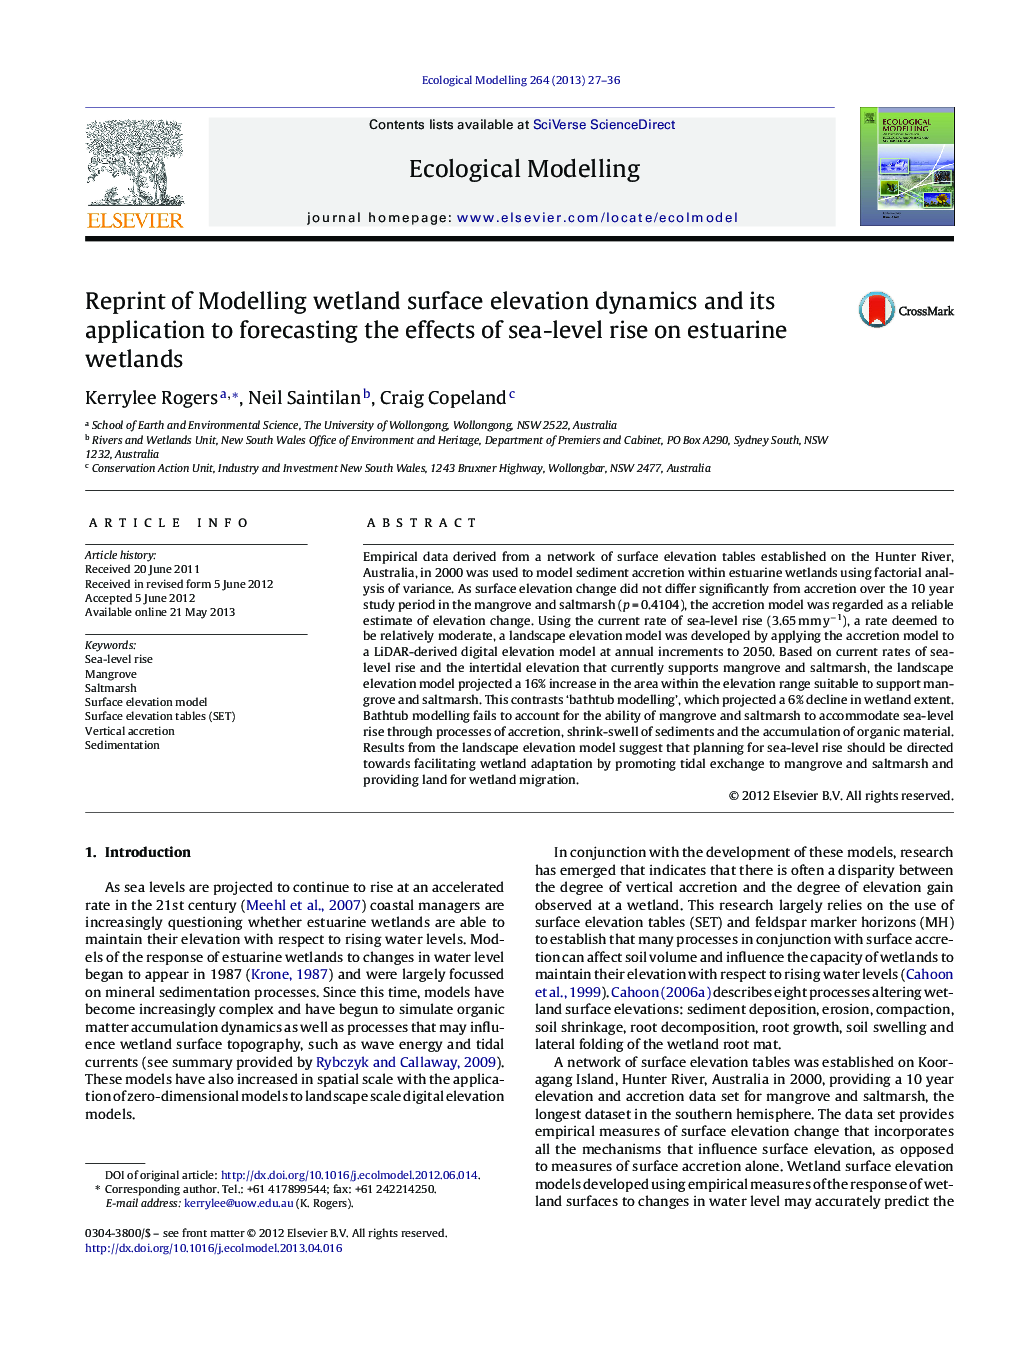 Reprint of Modelling wetland surface elevation dynamics and its application to forecasting the effects of sea-level rise on estuarine wetlands